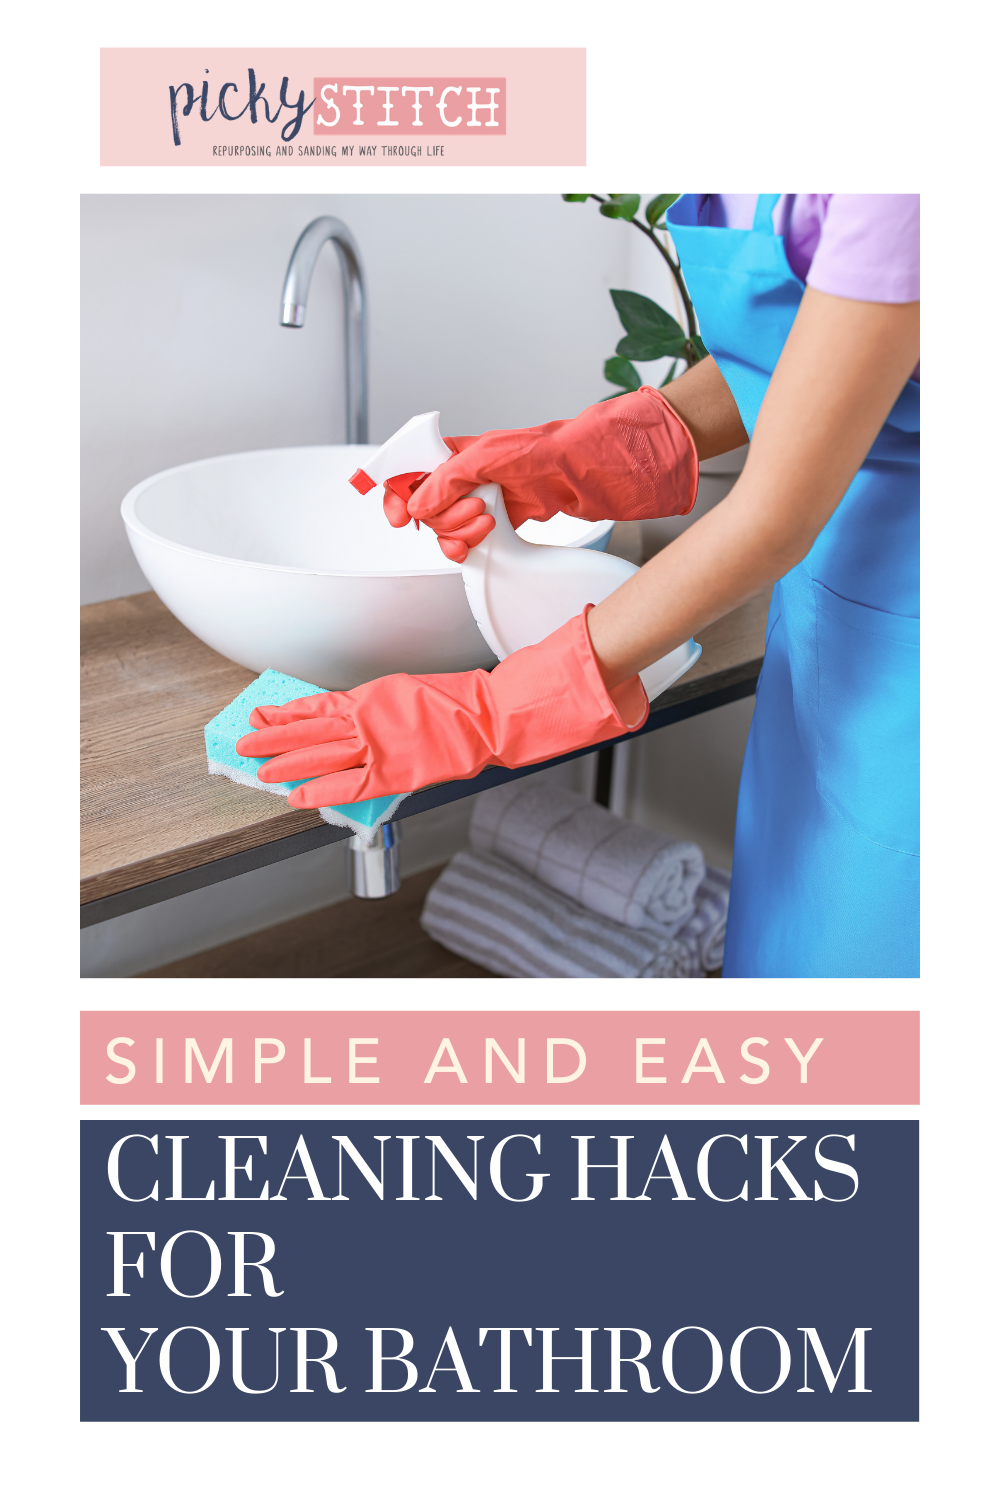 Pickystitch.com is loaded with DIYs and hacks to make your life easier. Find clever ways to get things done more efficiently. These creative hacks will make cleaning the bathroom feel like less of a chore.